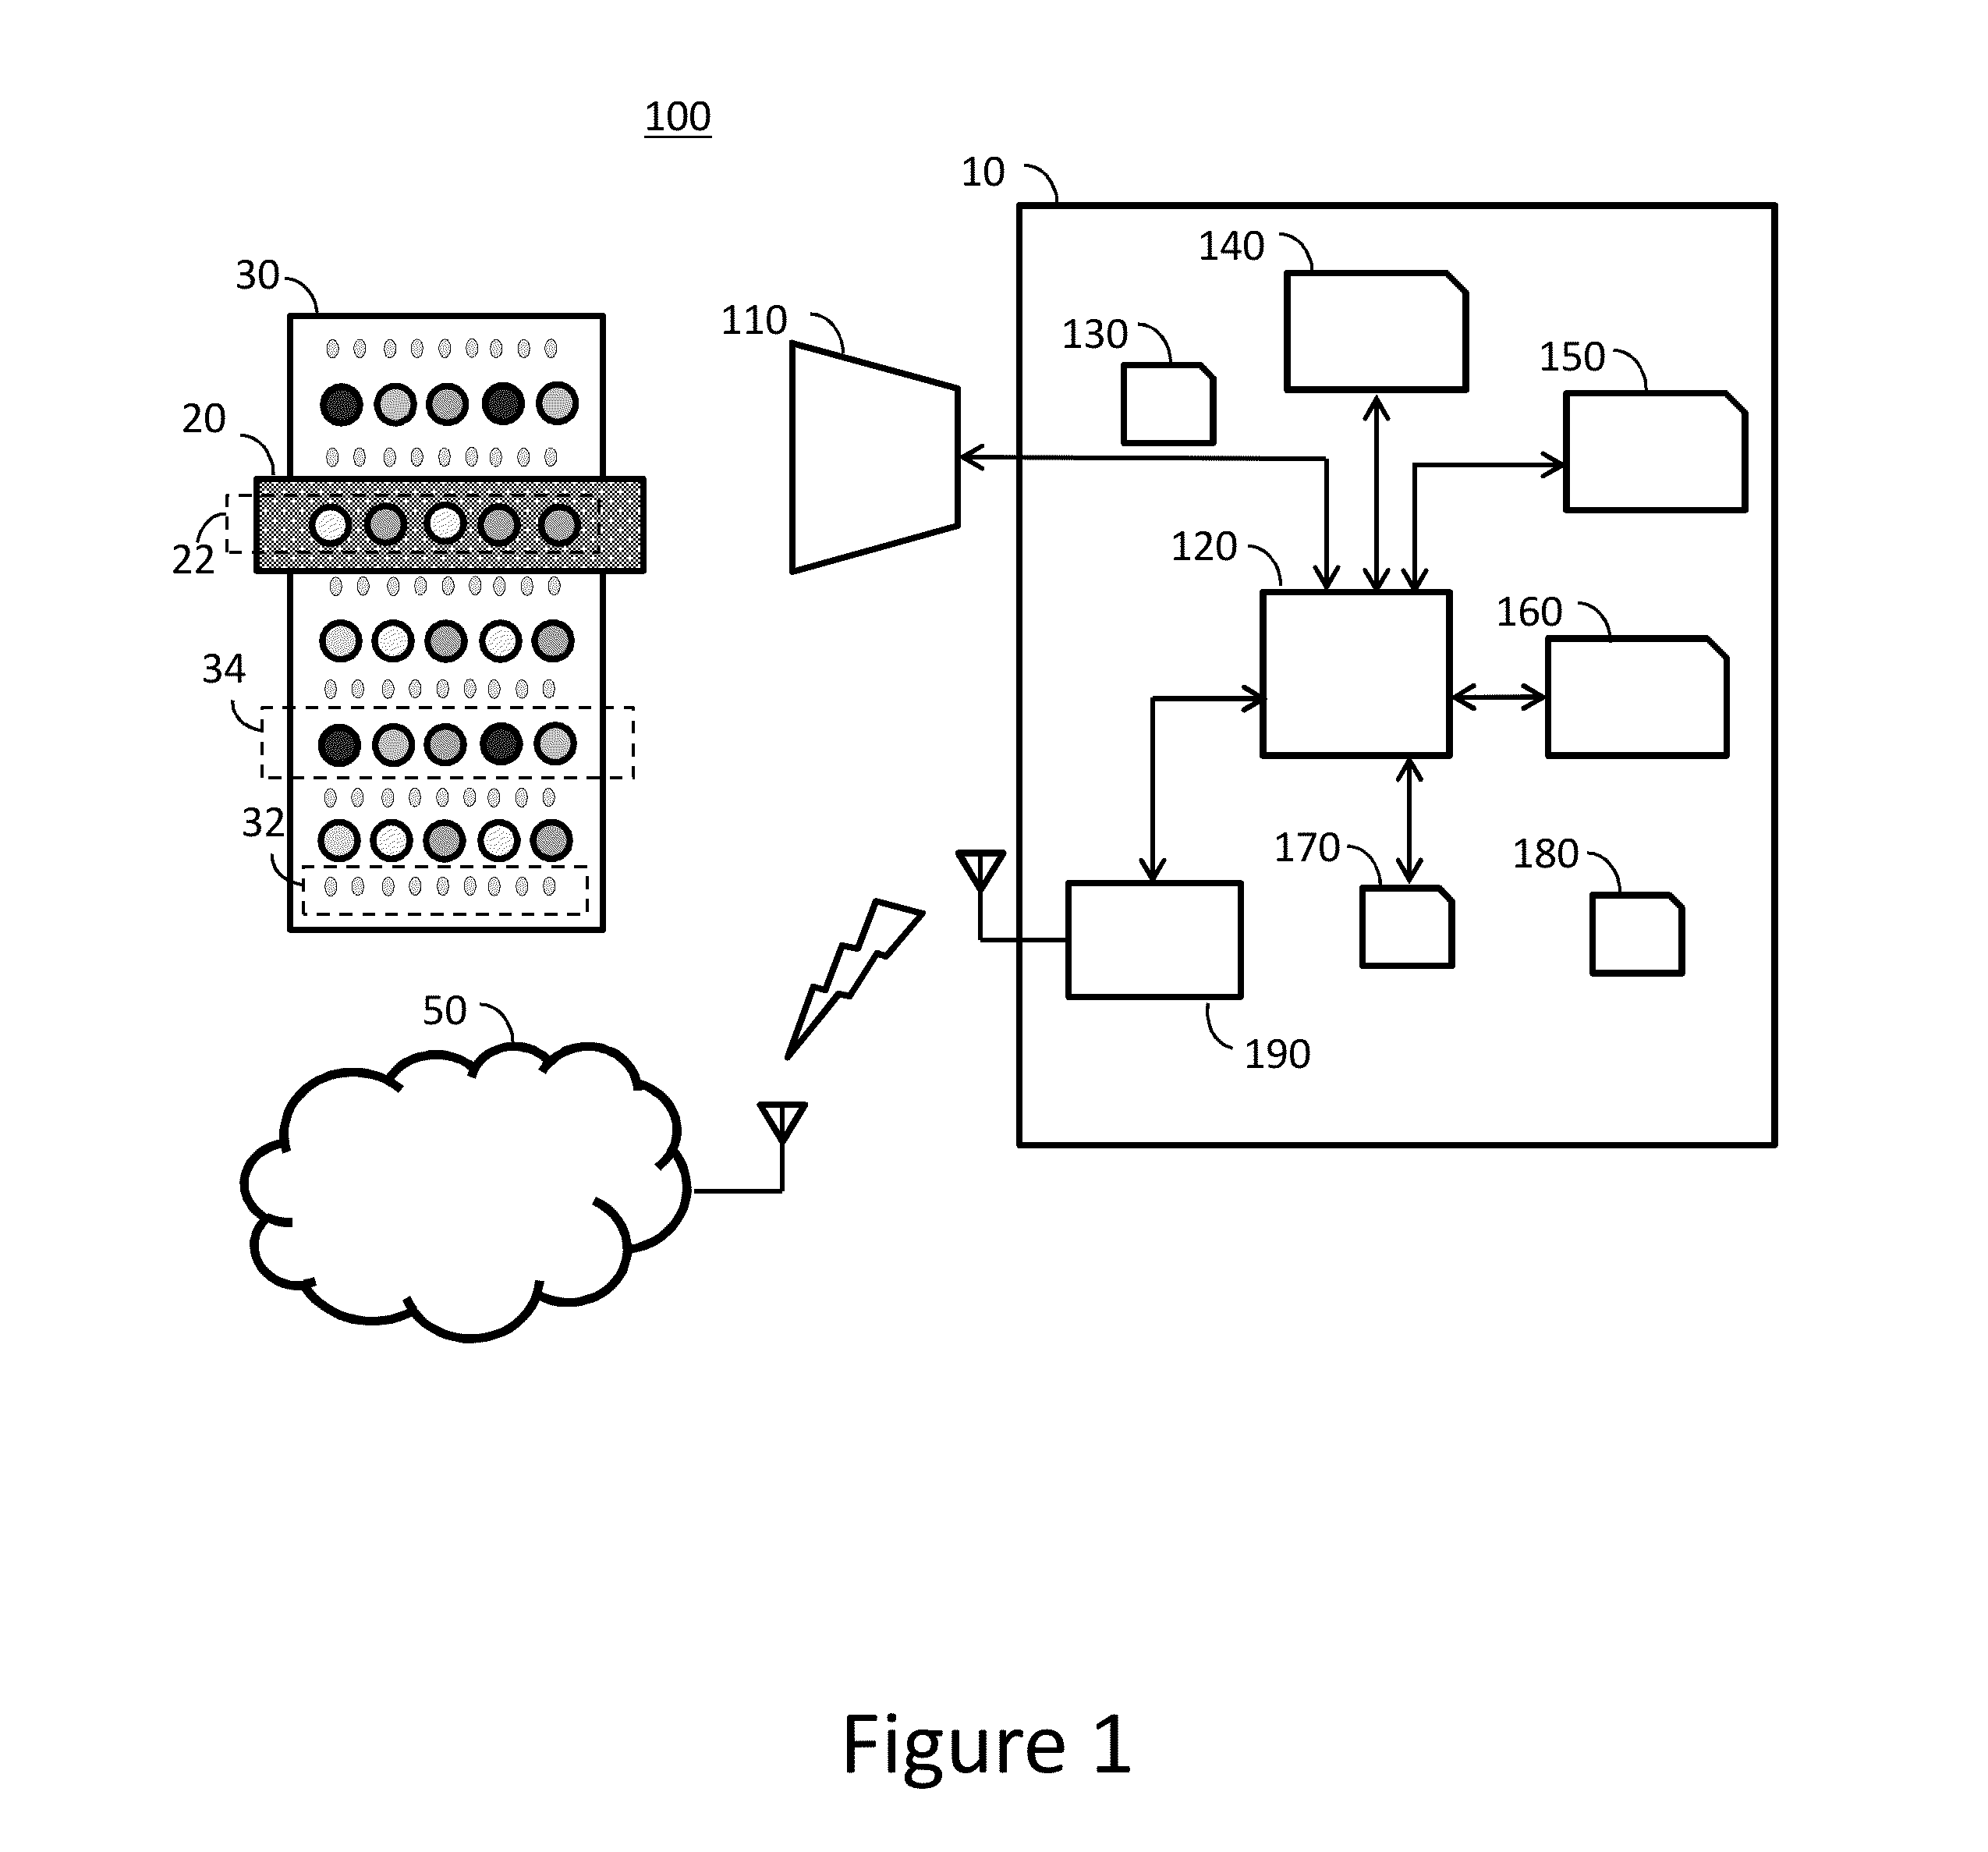 Method and system for automated visual analysis of a dipstick using standard user equipment